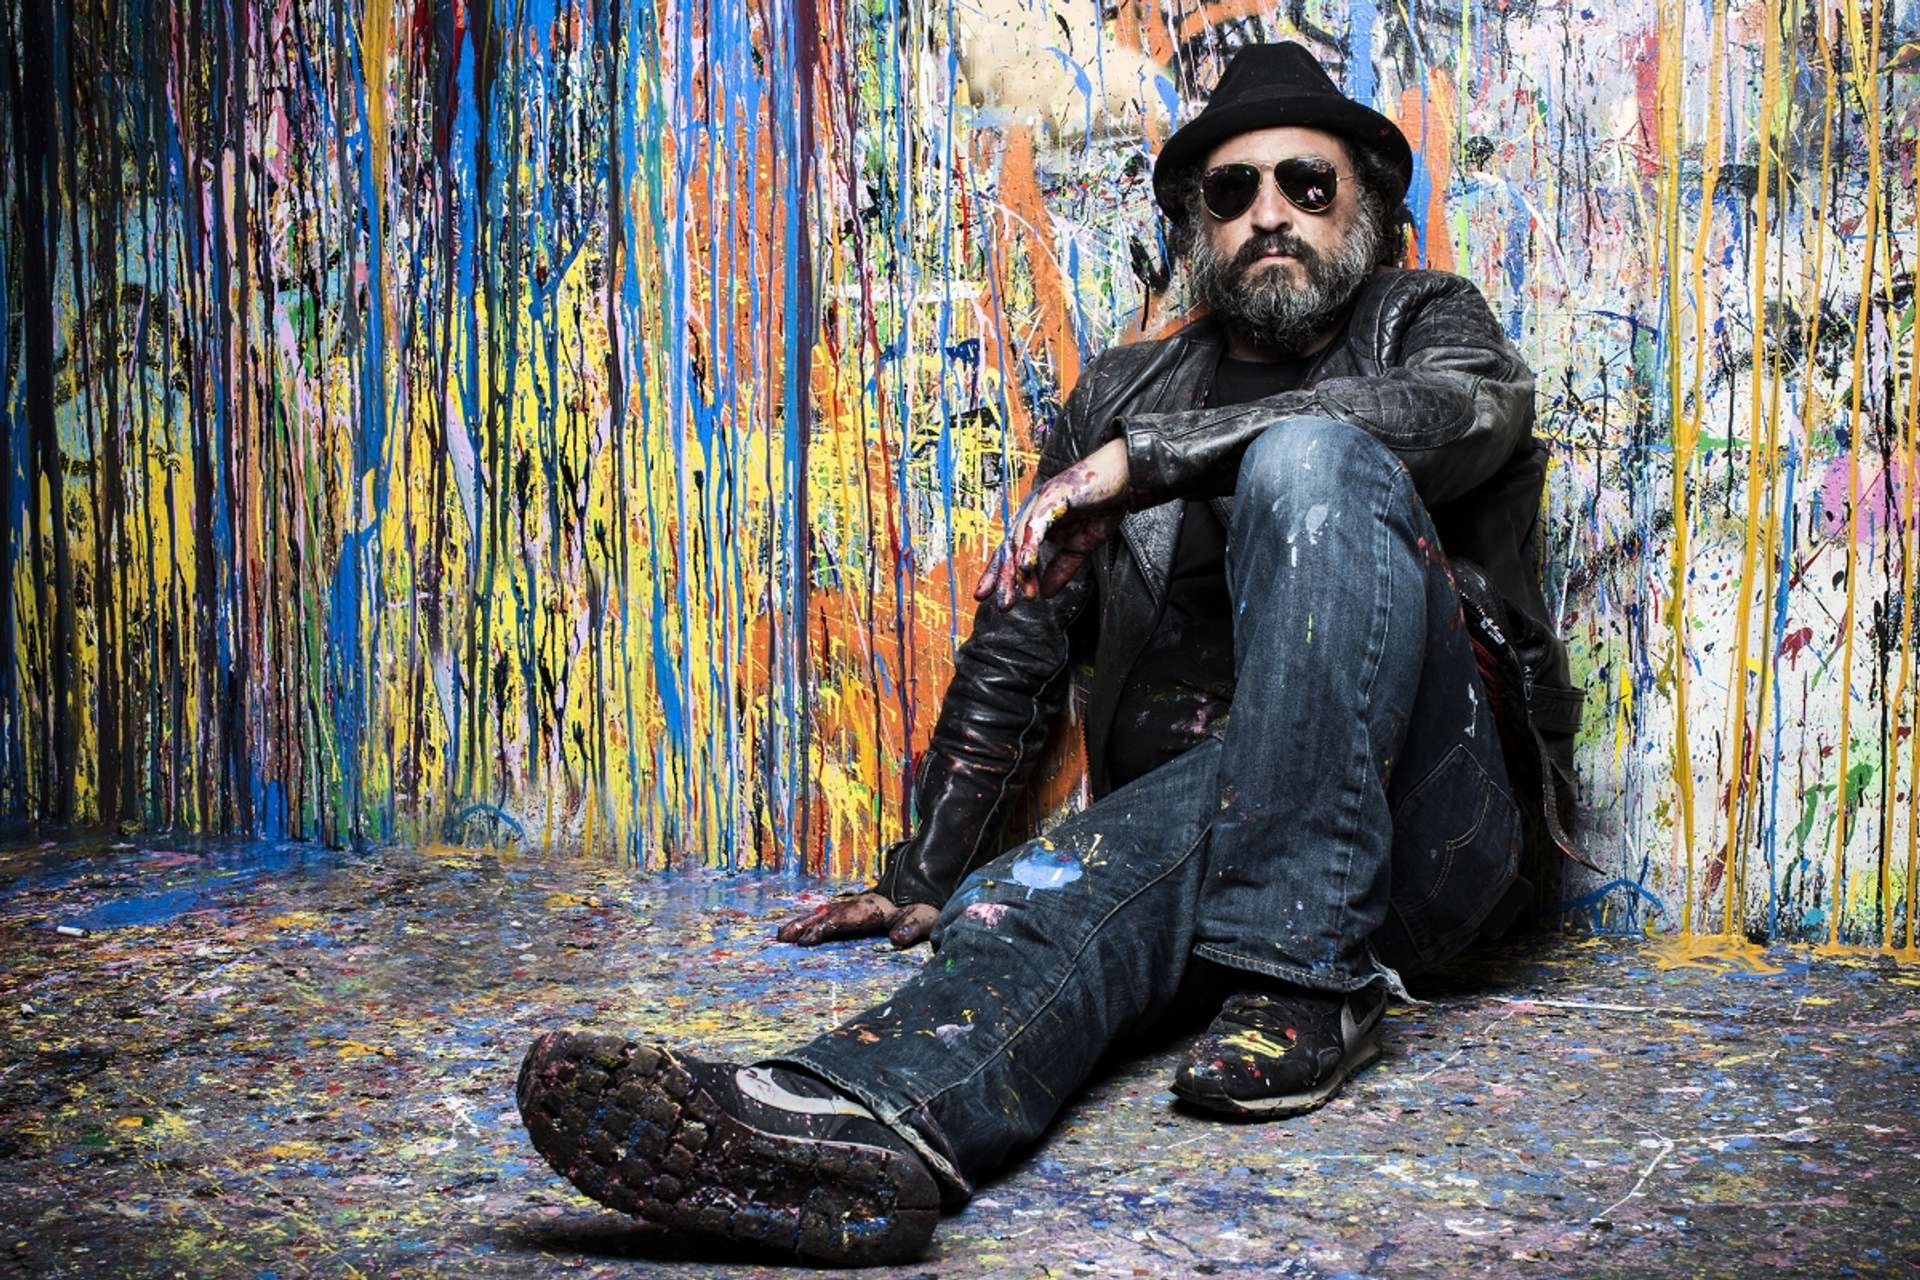 A portrait of the artist Mr. Brainwash, showing wearing paint-splattered clothes and sunglasses. He is sitting on the floor and leaning against a wall full of colourful paint splatter.